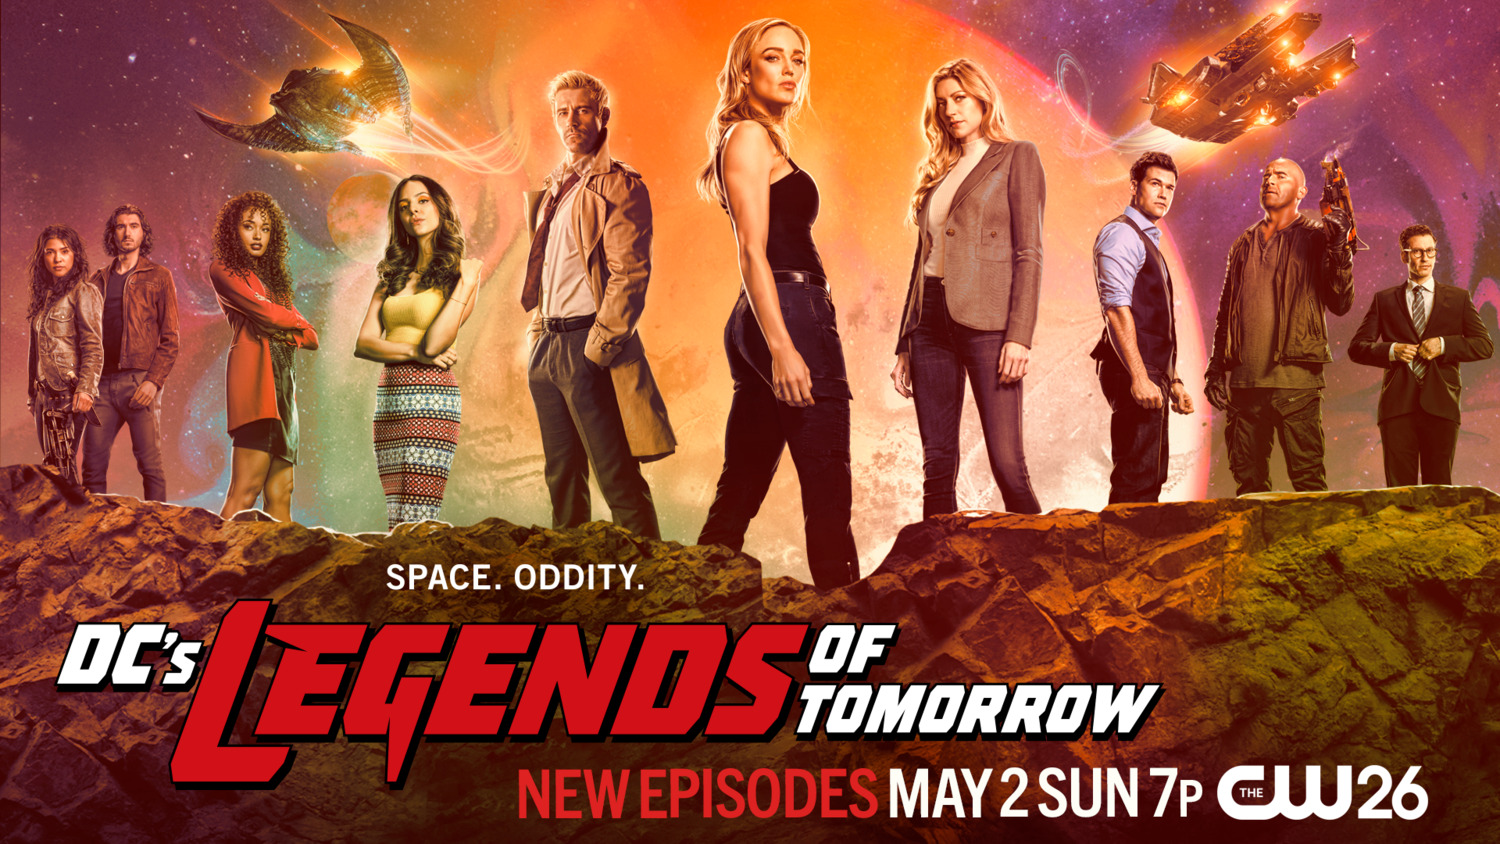 Extra Large TV Poster Image for Legends of Tomorrow (#25 of 28)